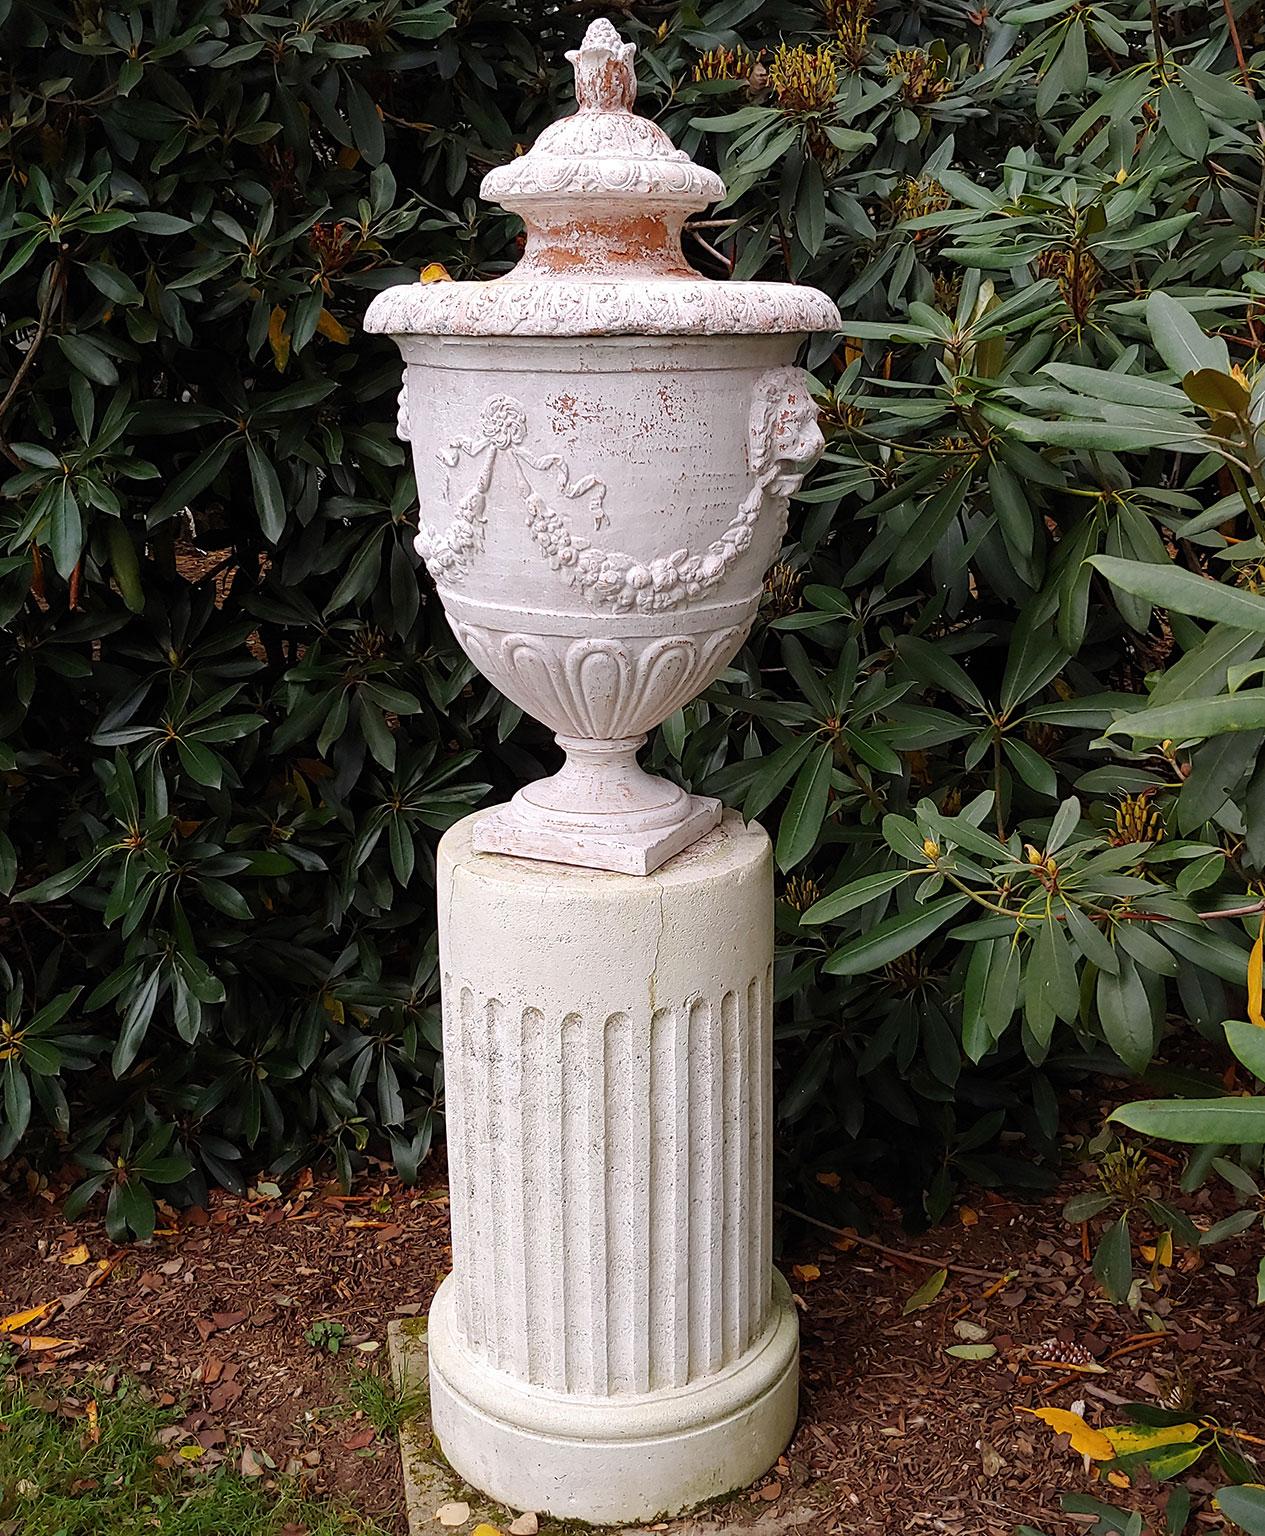 Neoclassical Revival White Painted Terra-cotta Urn with Lid on White Stone Pedestal